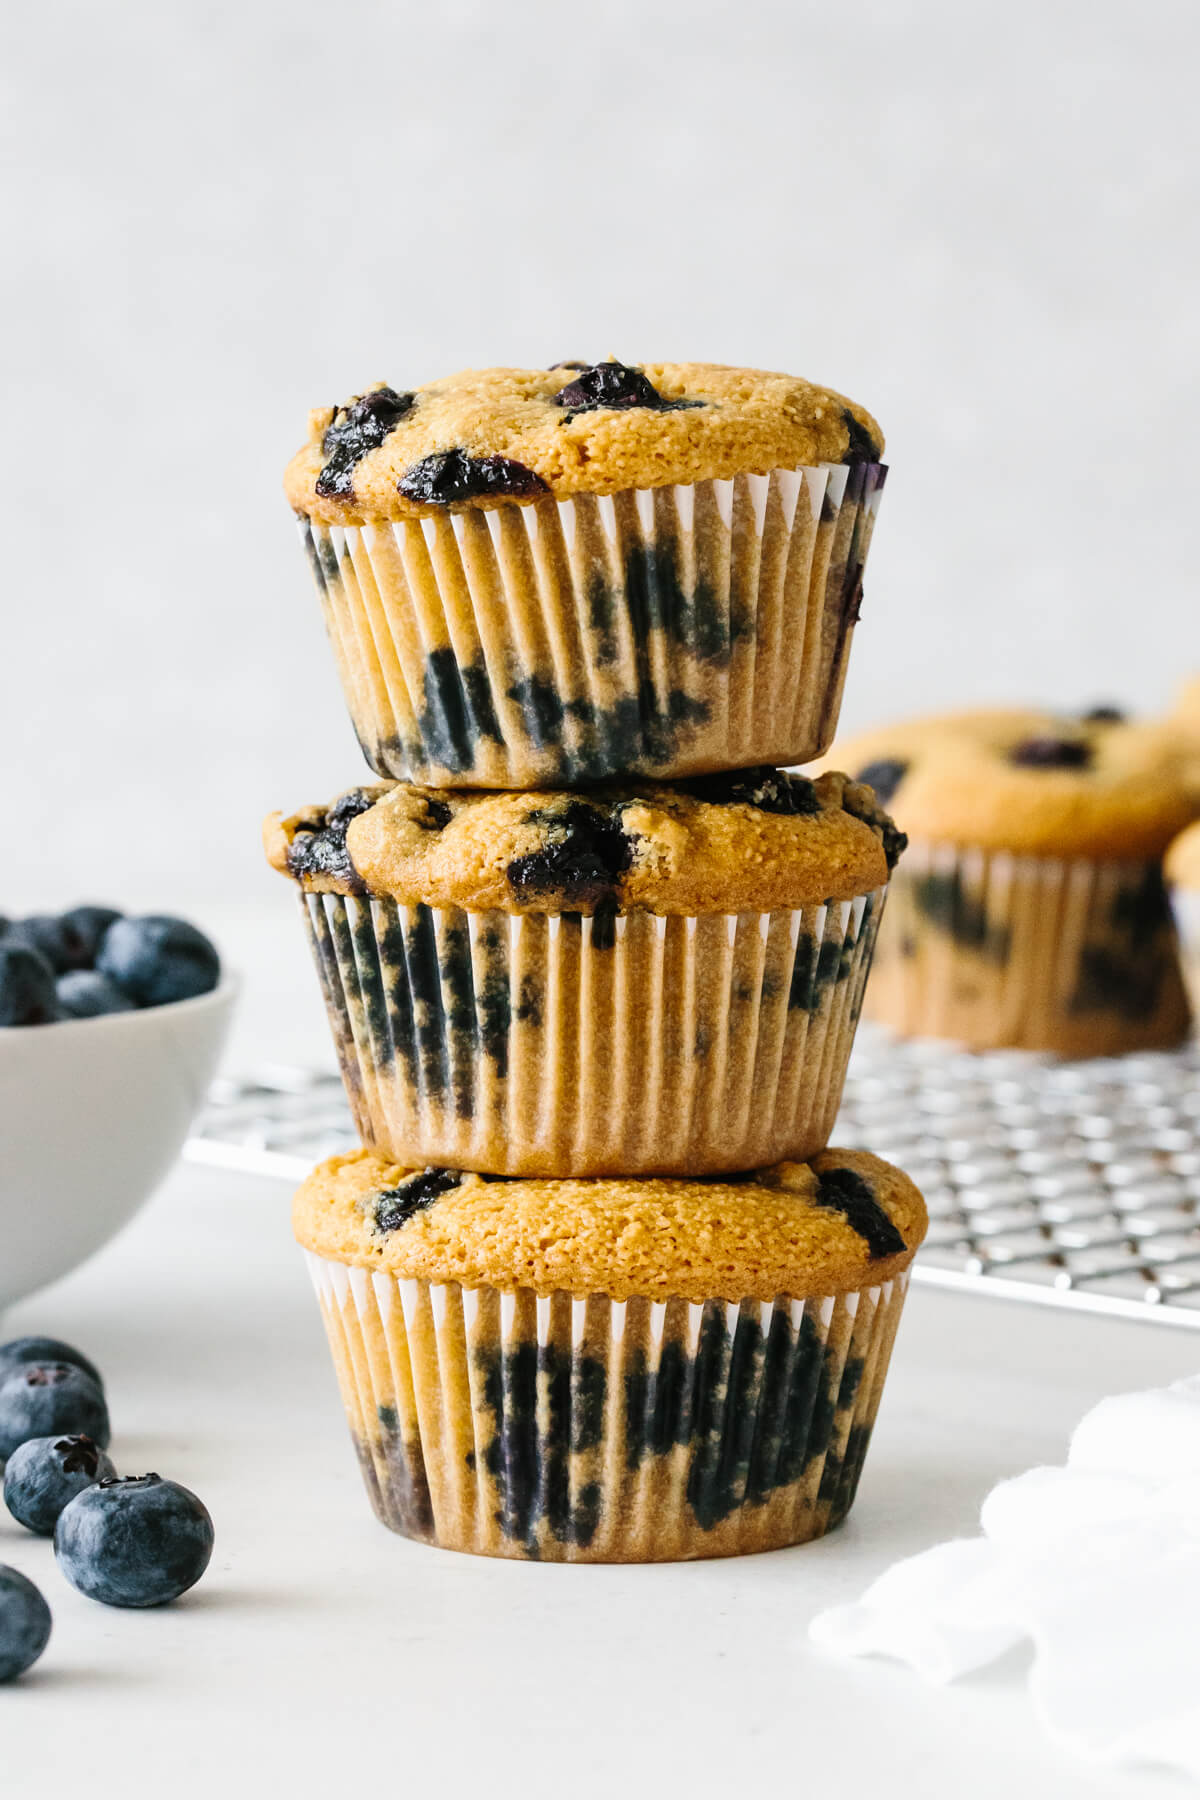 Three paleo blueberry muffins stacked on top of each other.